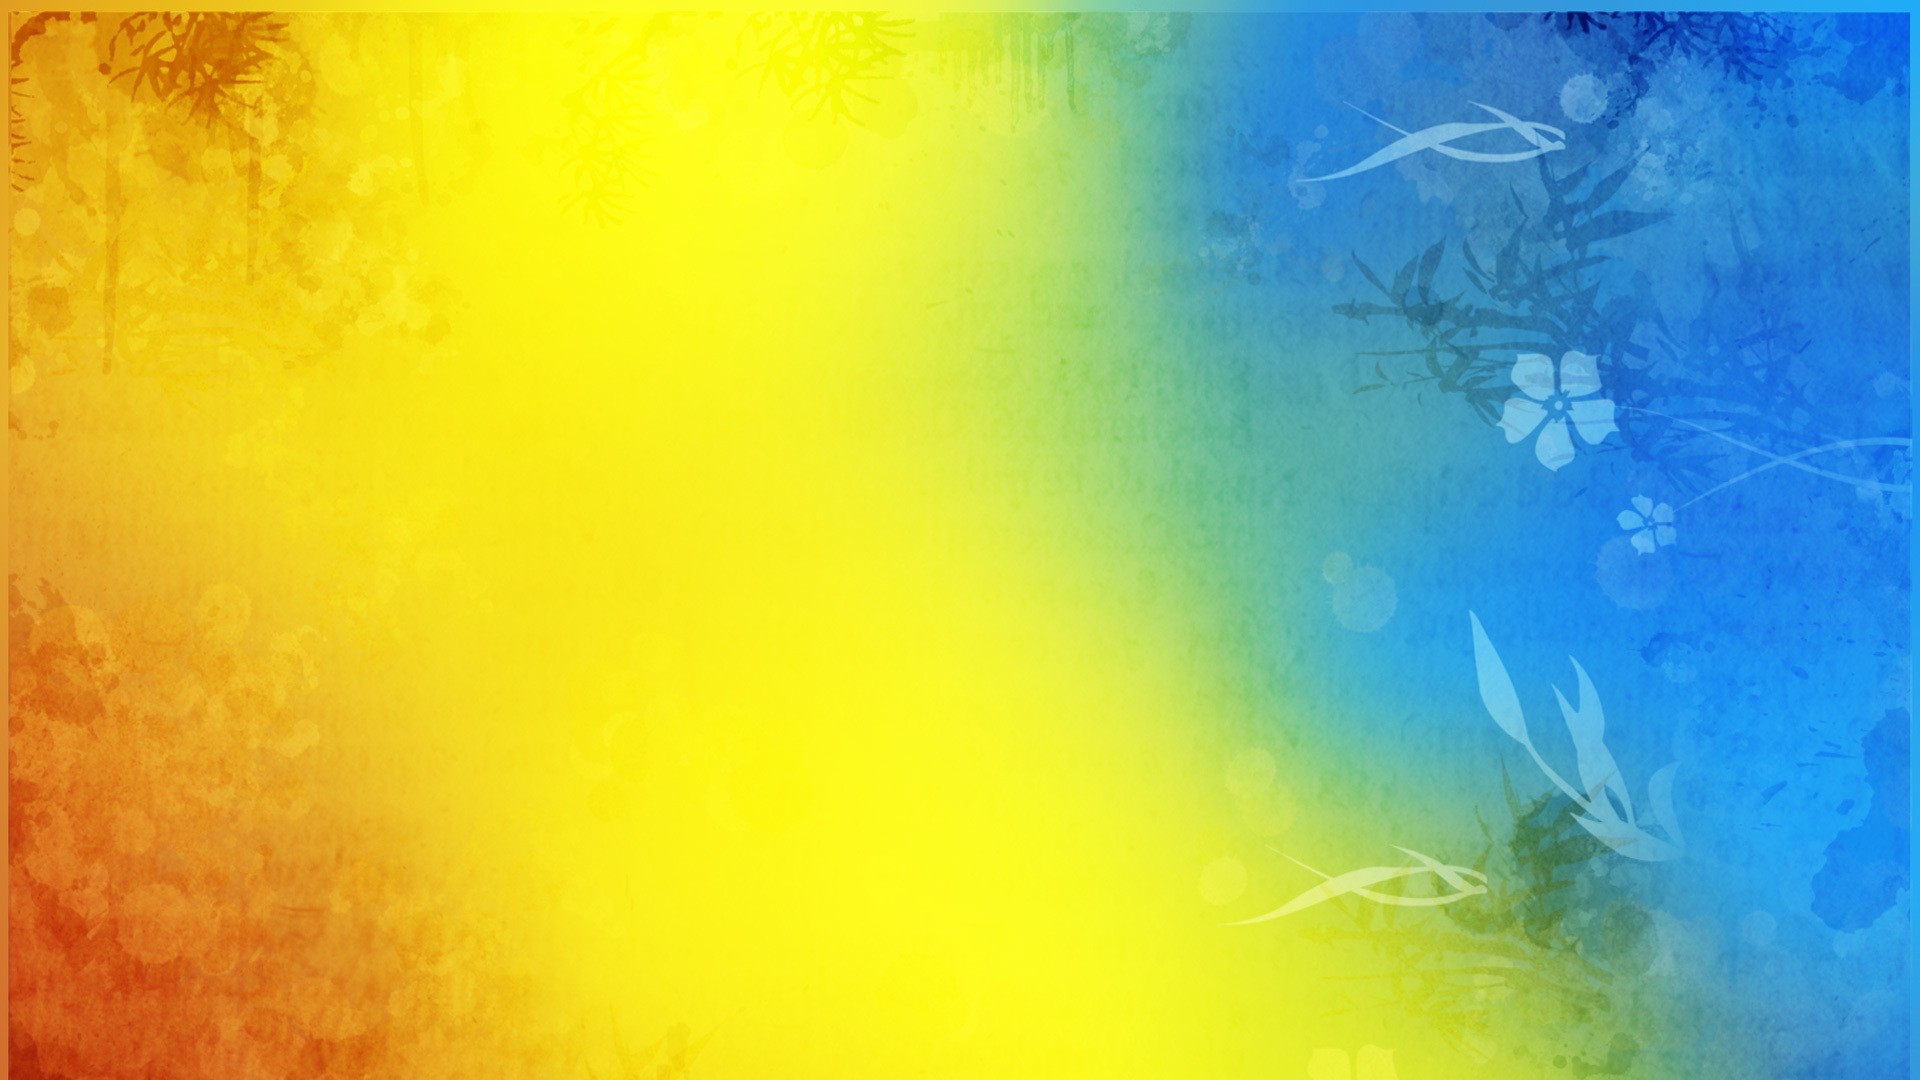 General 1920x1080 abstract digital art colorful blue orange yellow